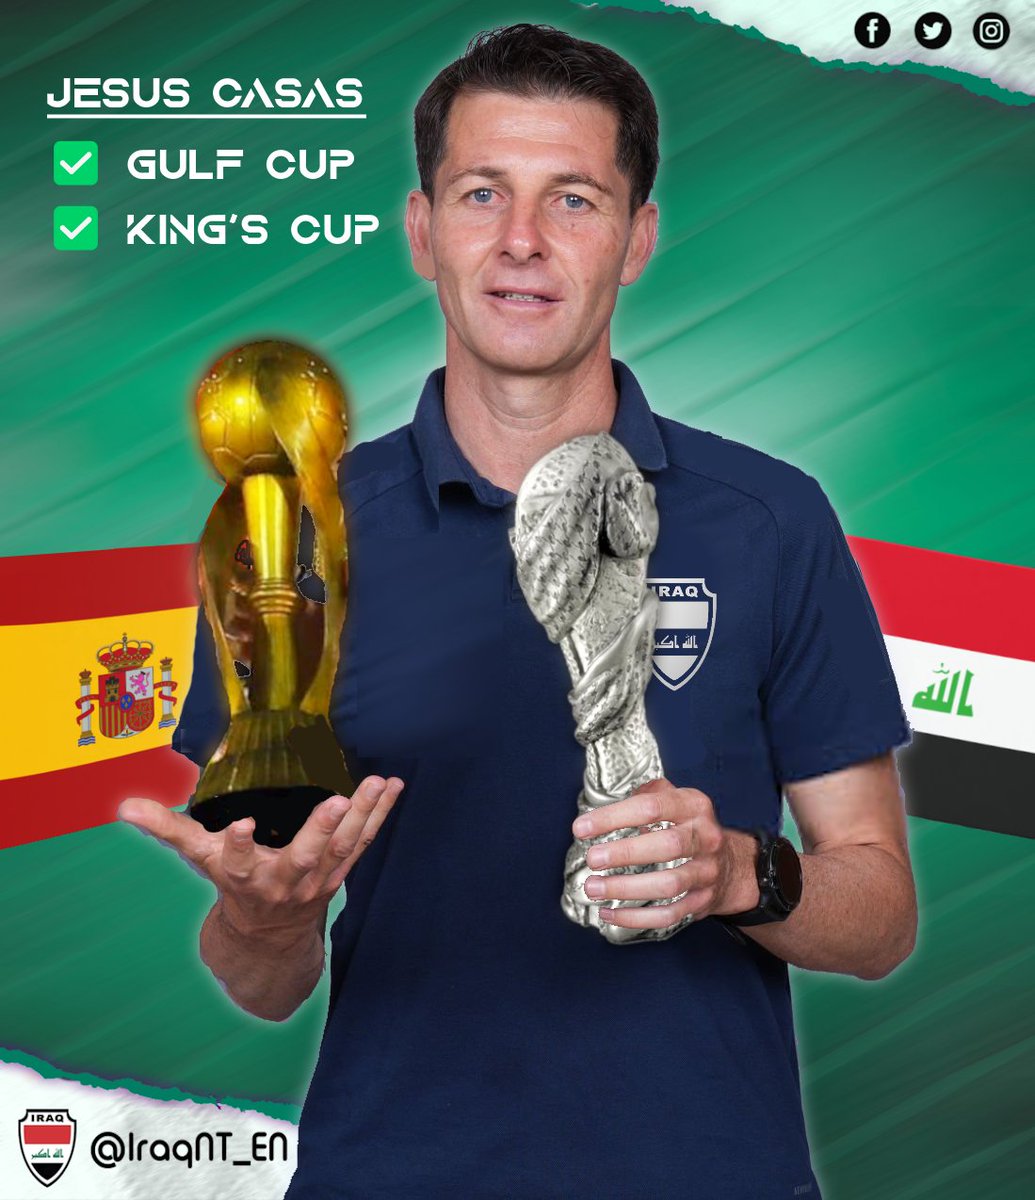 Iraq National Team on X: " Gulf Cup King's Cup Two trophies in the bag for  our boss, Jesús Casas! https://t.co/KmSQzEXxVo" / X